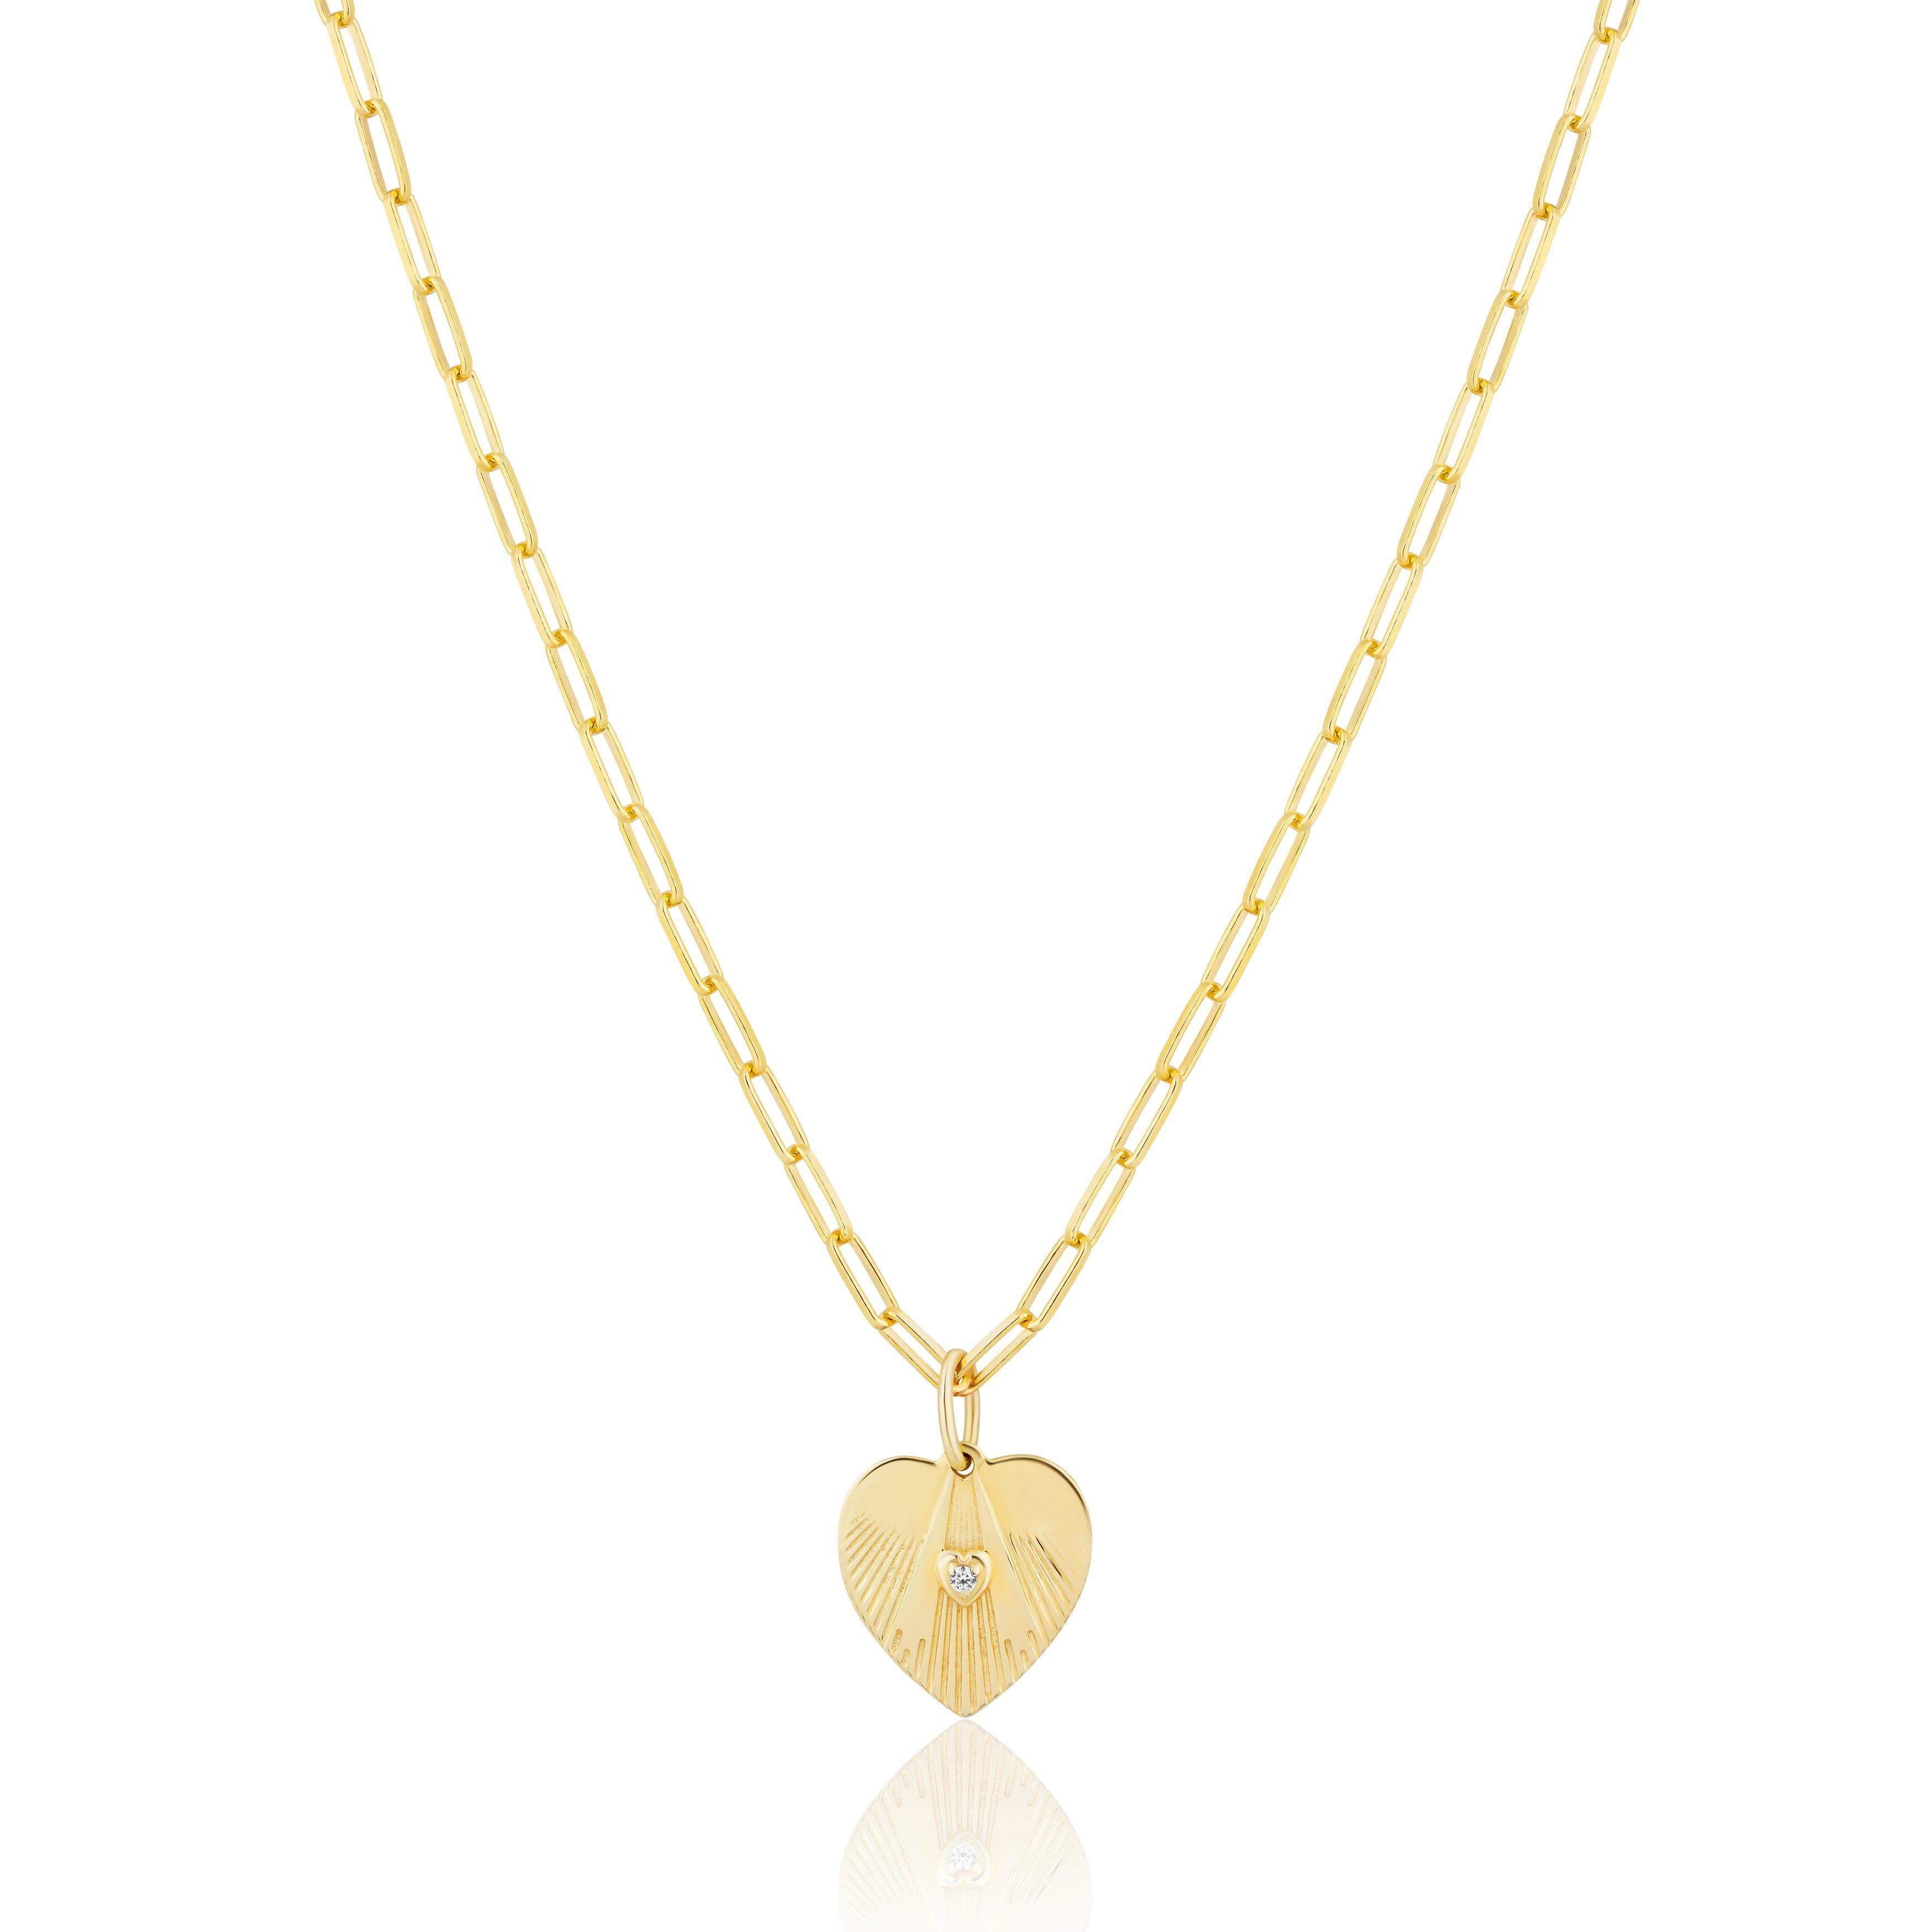 Sterling silver plated in 14 karat yellow gold mini heart charm with white zircon on a paperclip chain.